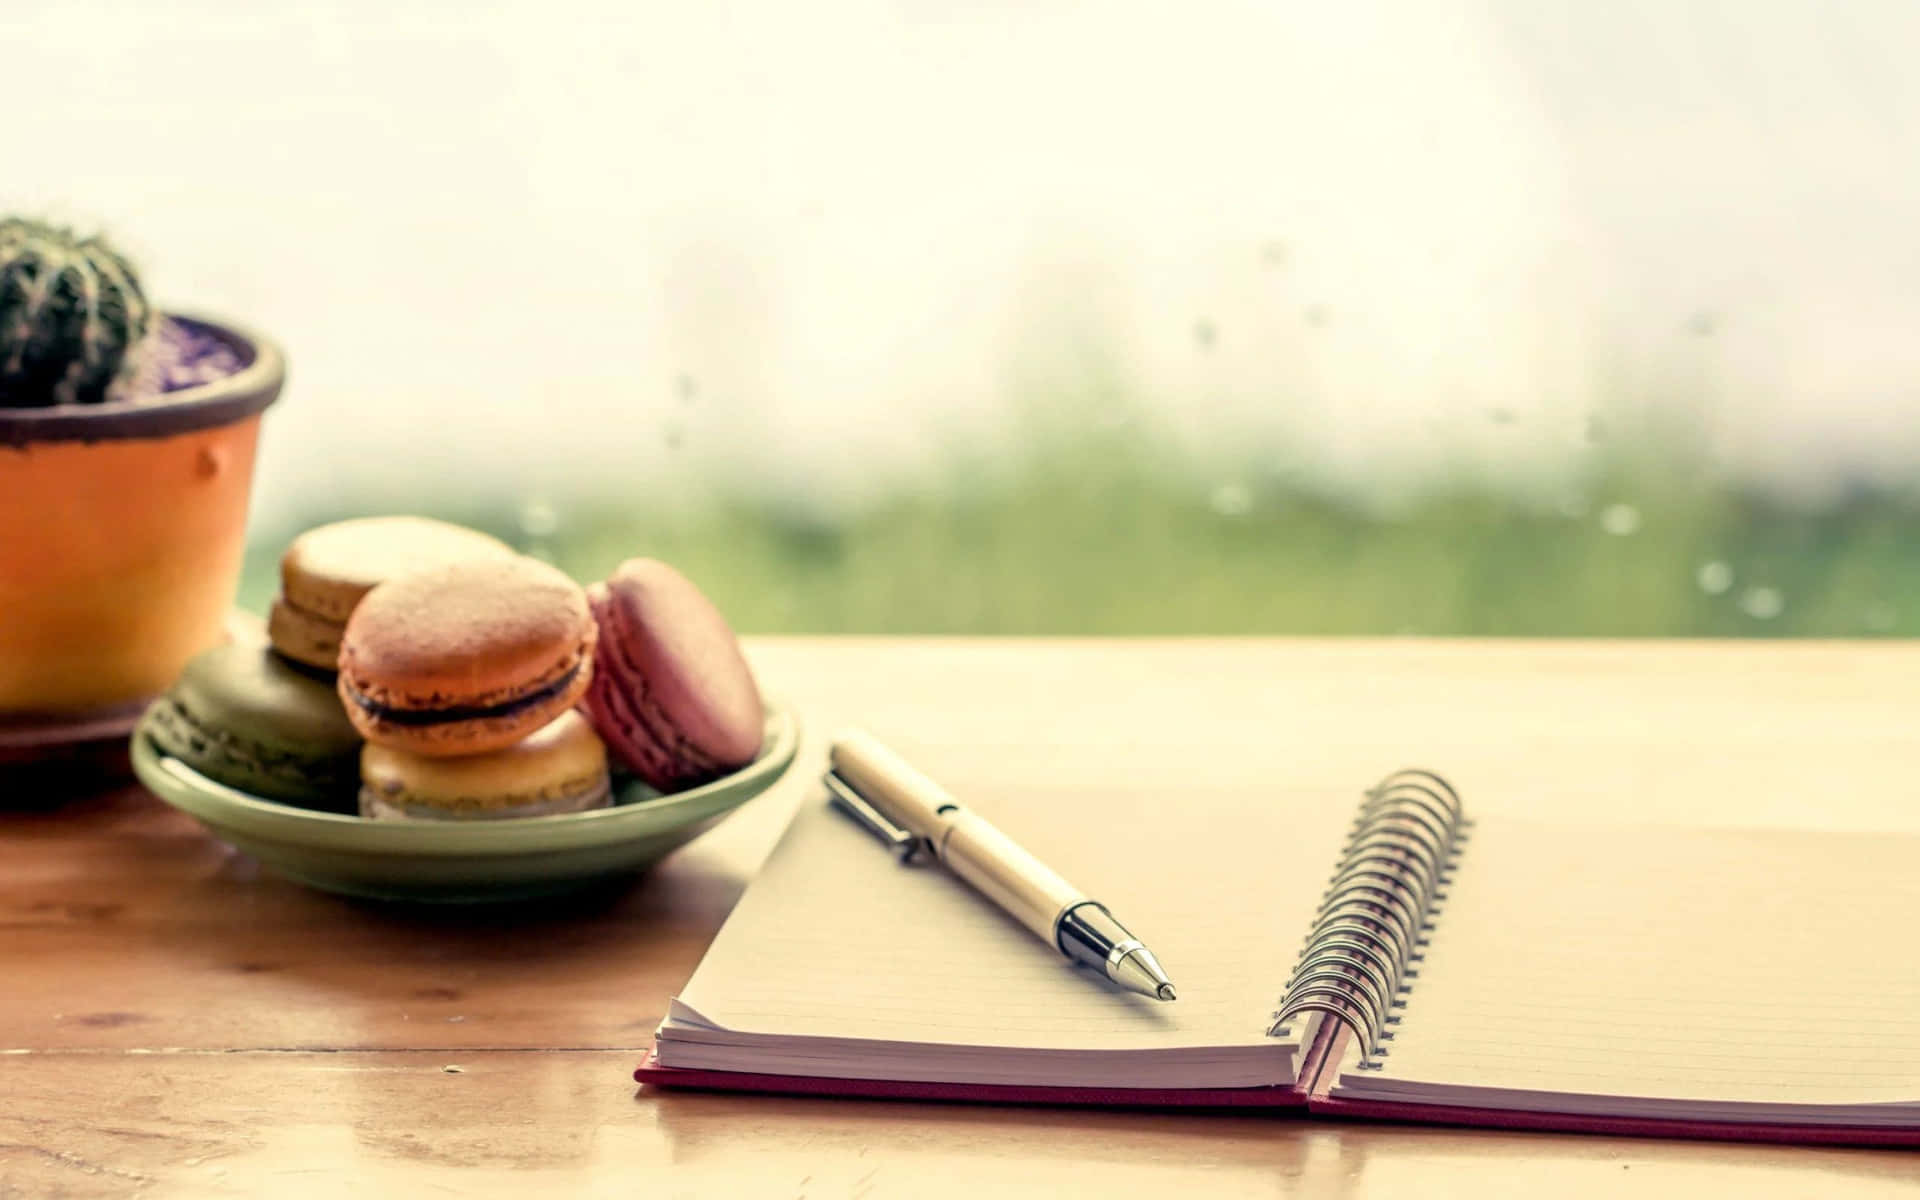 A Notebook, Pen, And Macarons On A Table